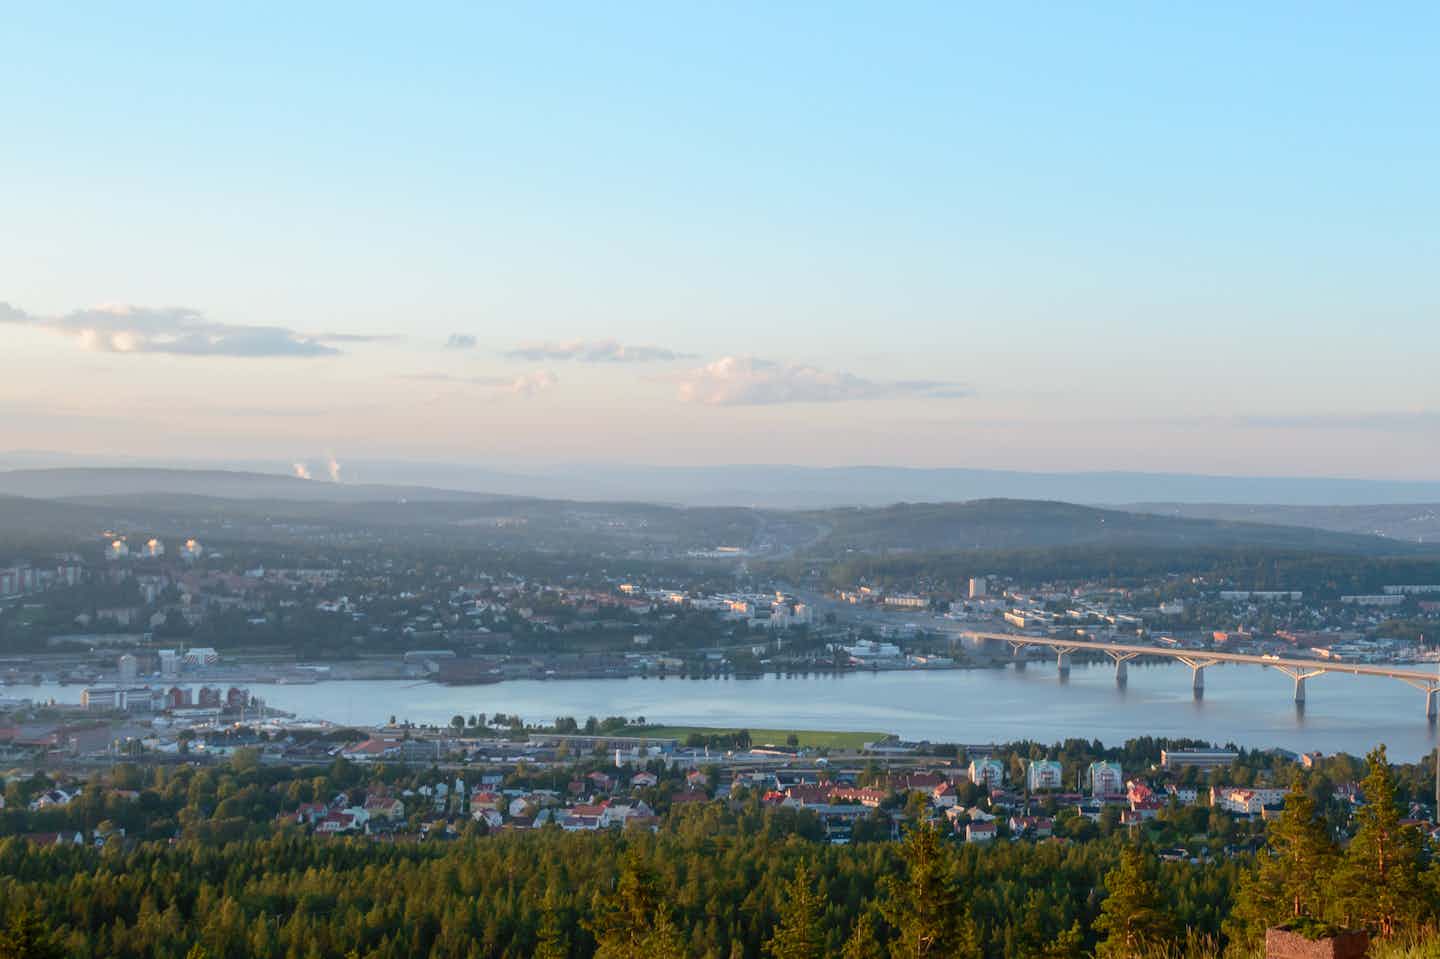 Camping in Sundsvall